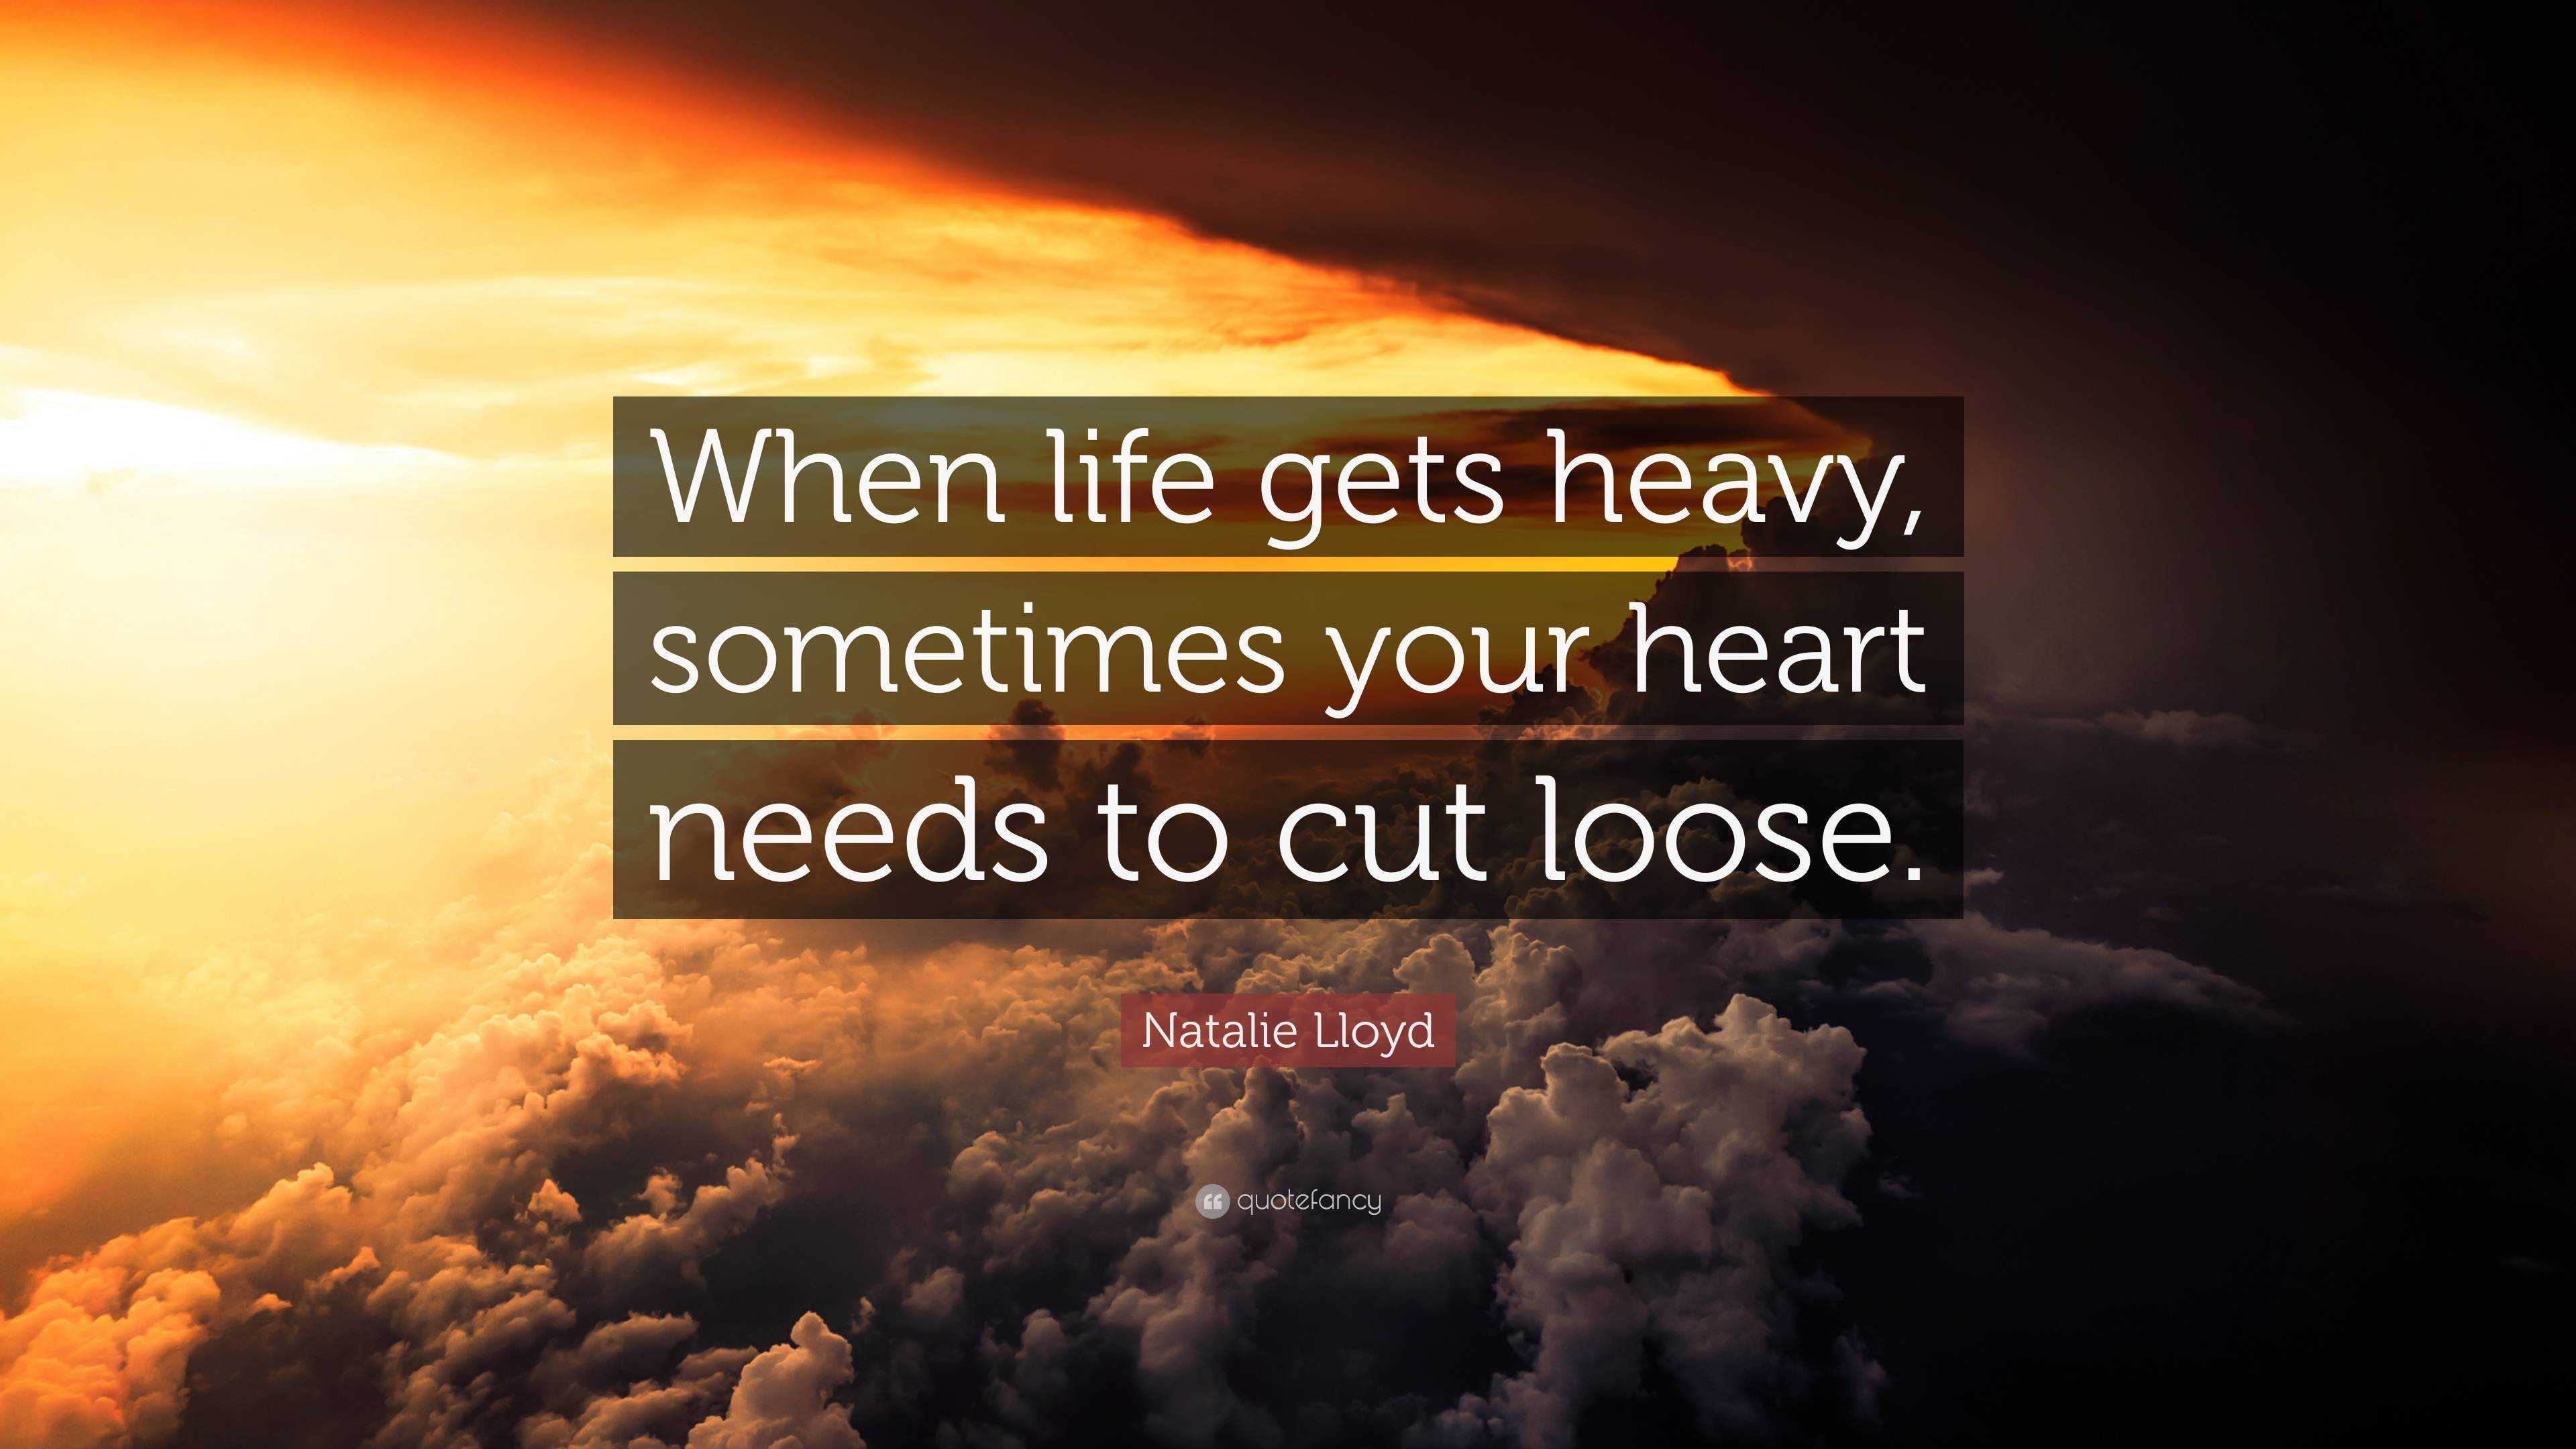 Natalie Lloyd Quote: “When life gets heavy, sometimes your heart